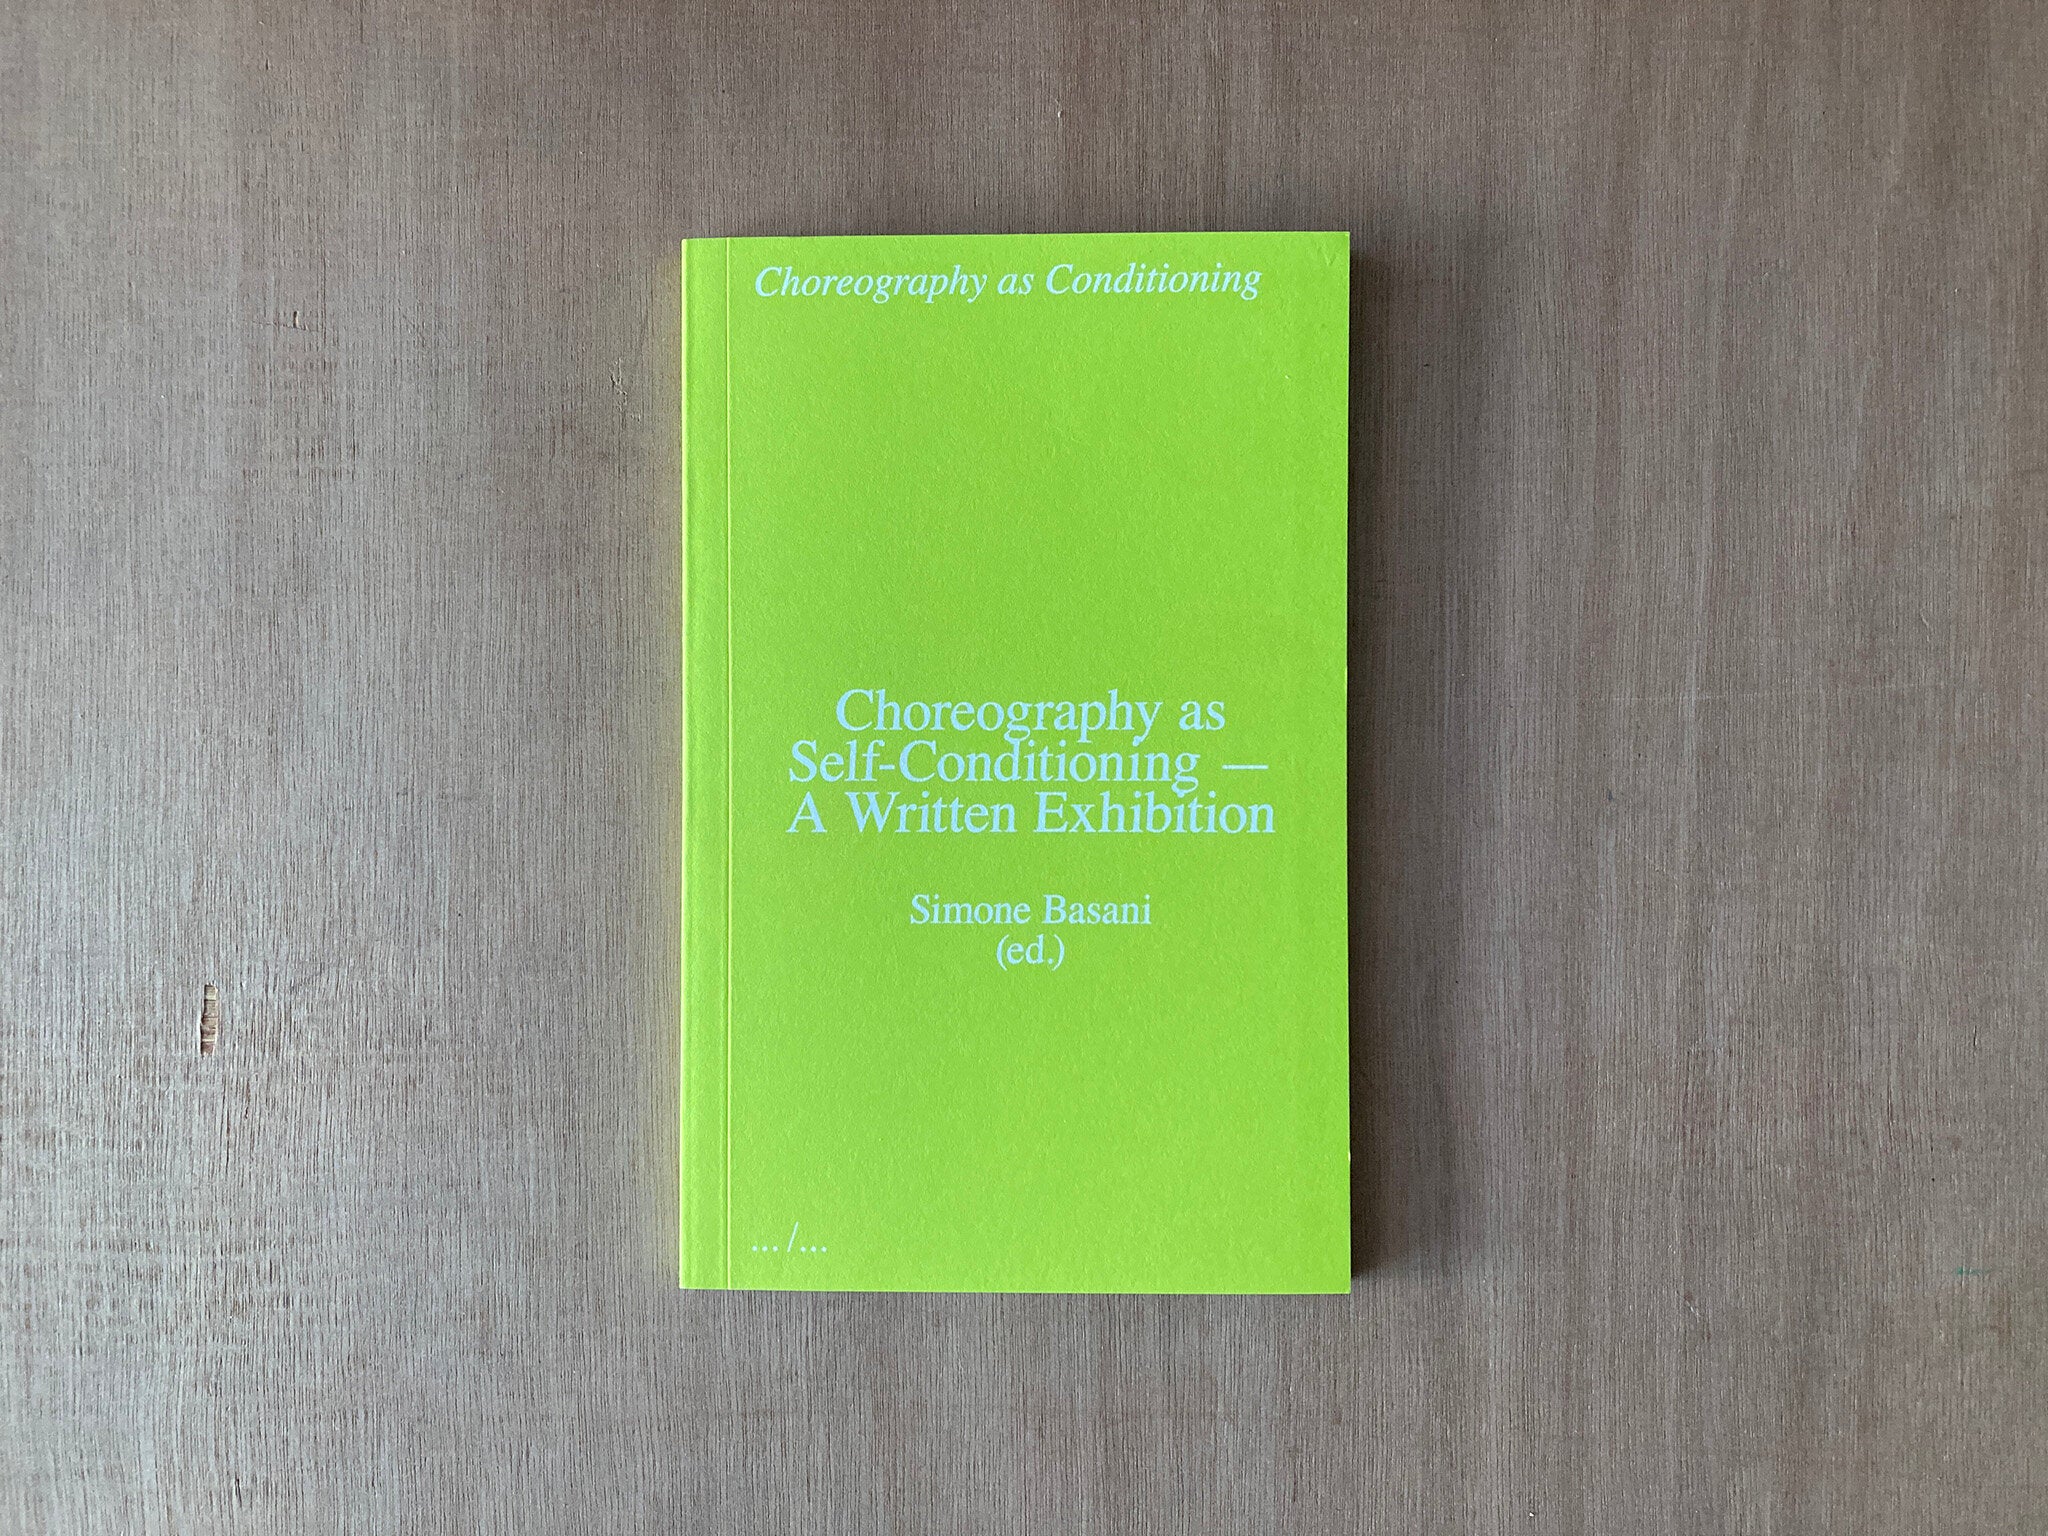 CHOREOGRAPHY AS SELF-CONDITIONING — A WRITTEN EXHIBITION edited by Simone Basani